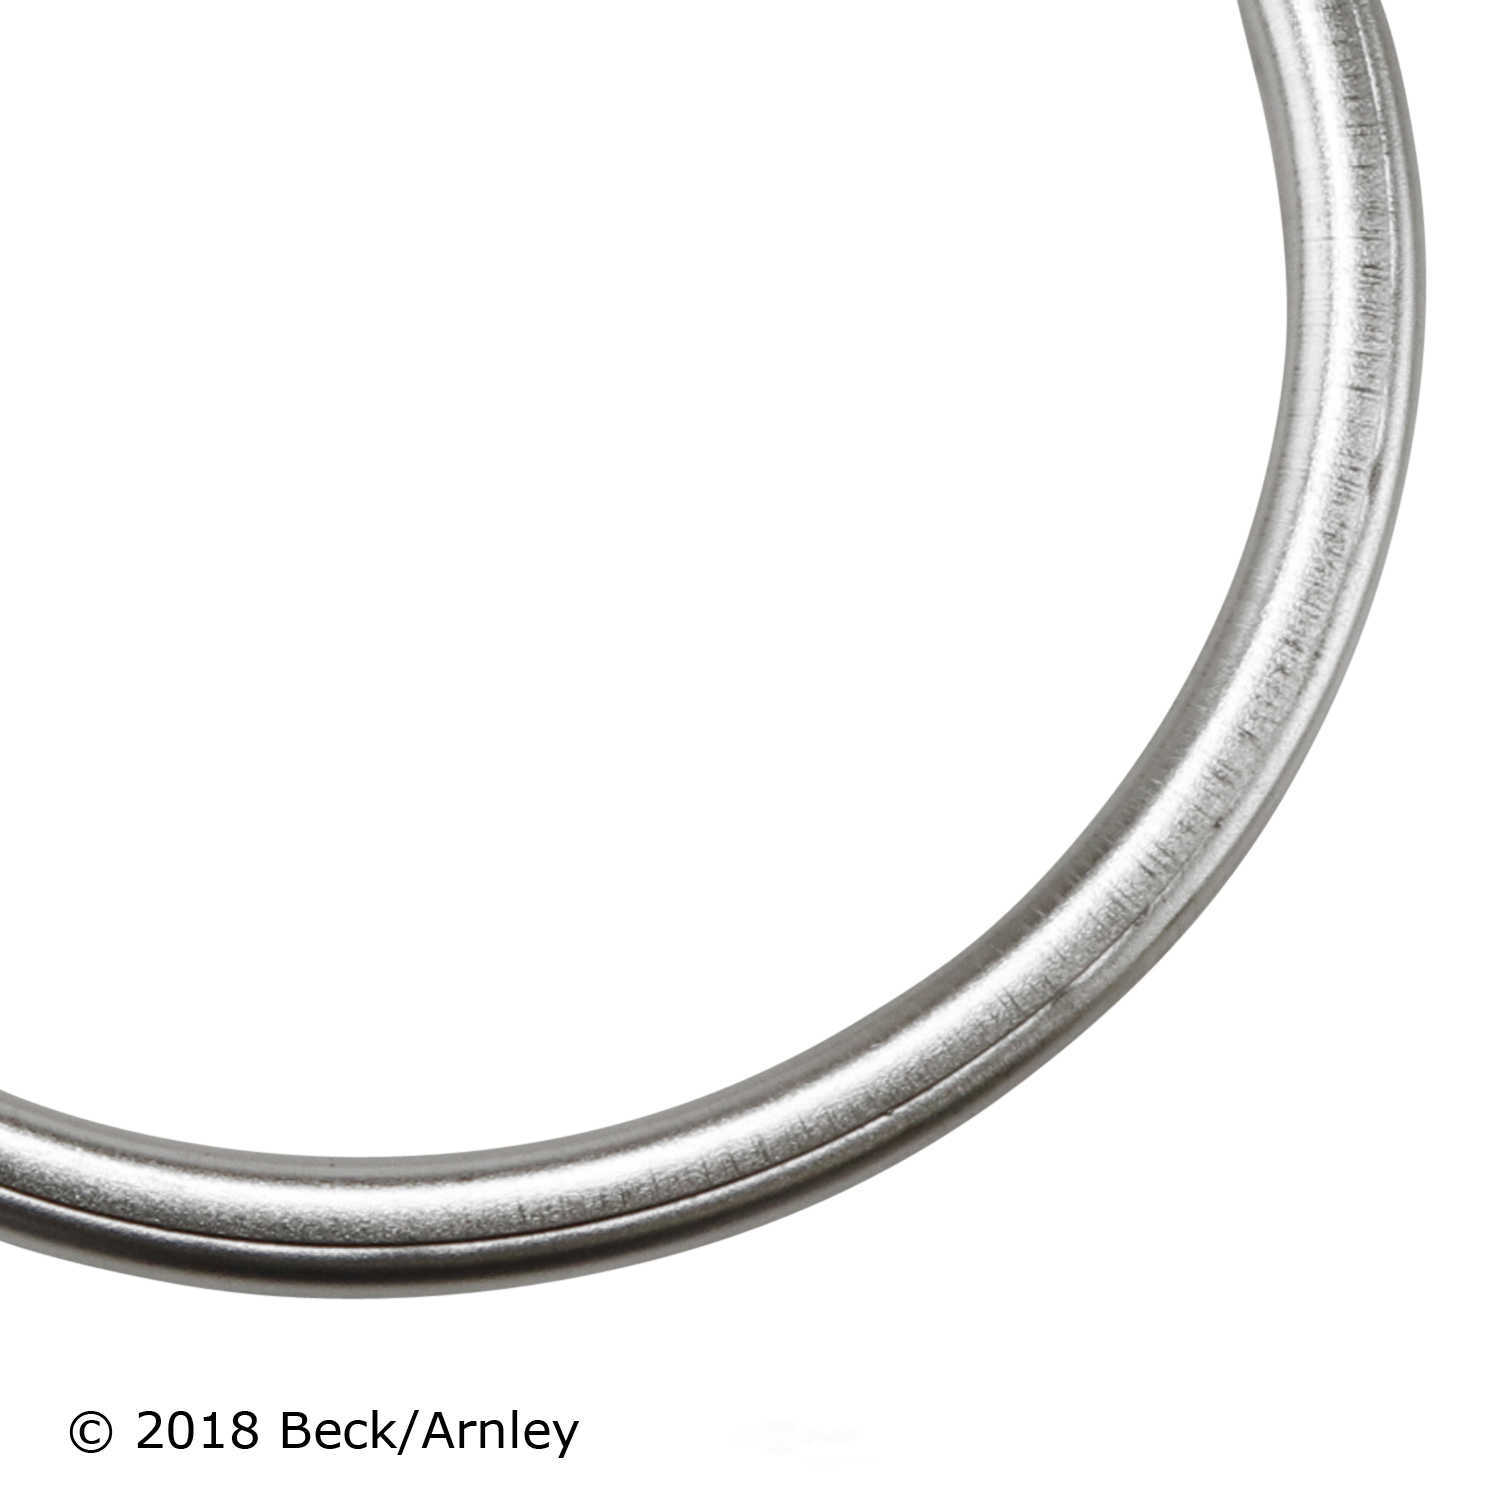 BECK/ARNLEY - Exhaust Pipe To Manifold Gasket - BAR 039-6432